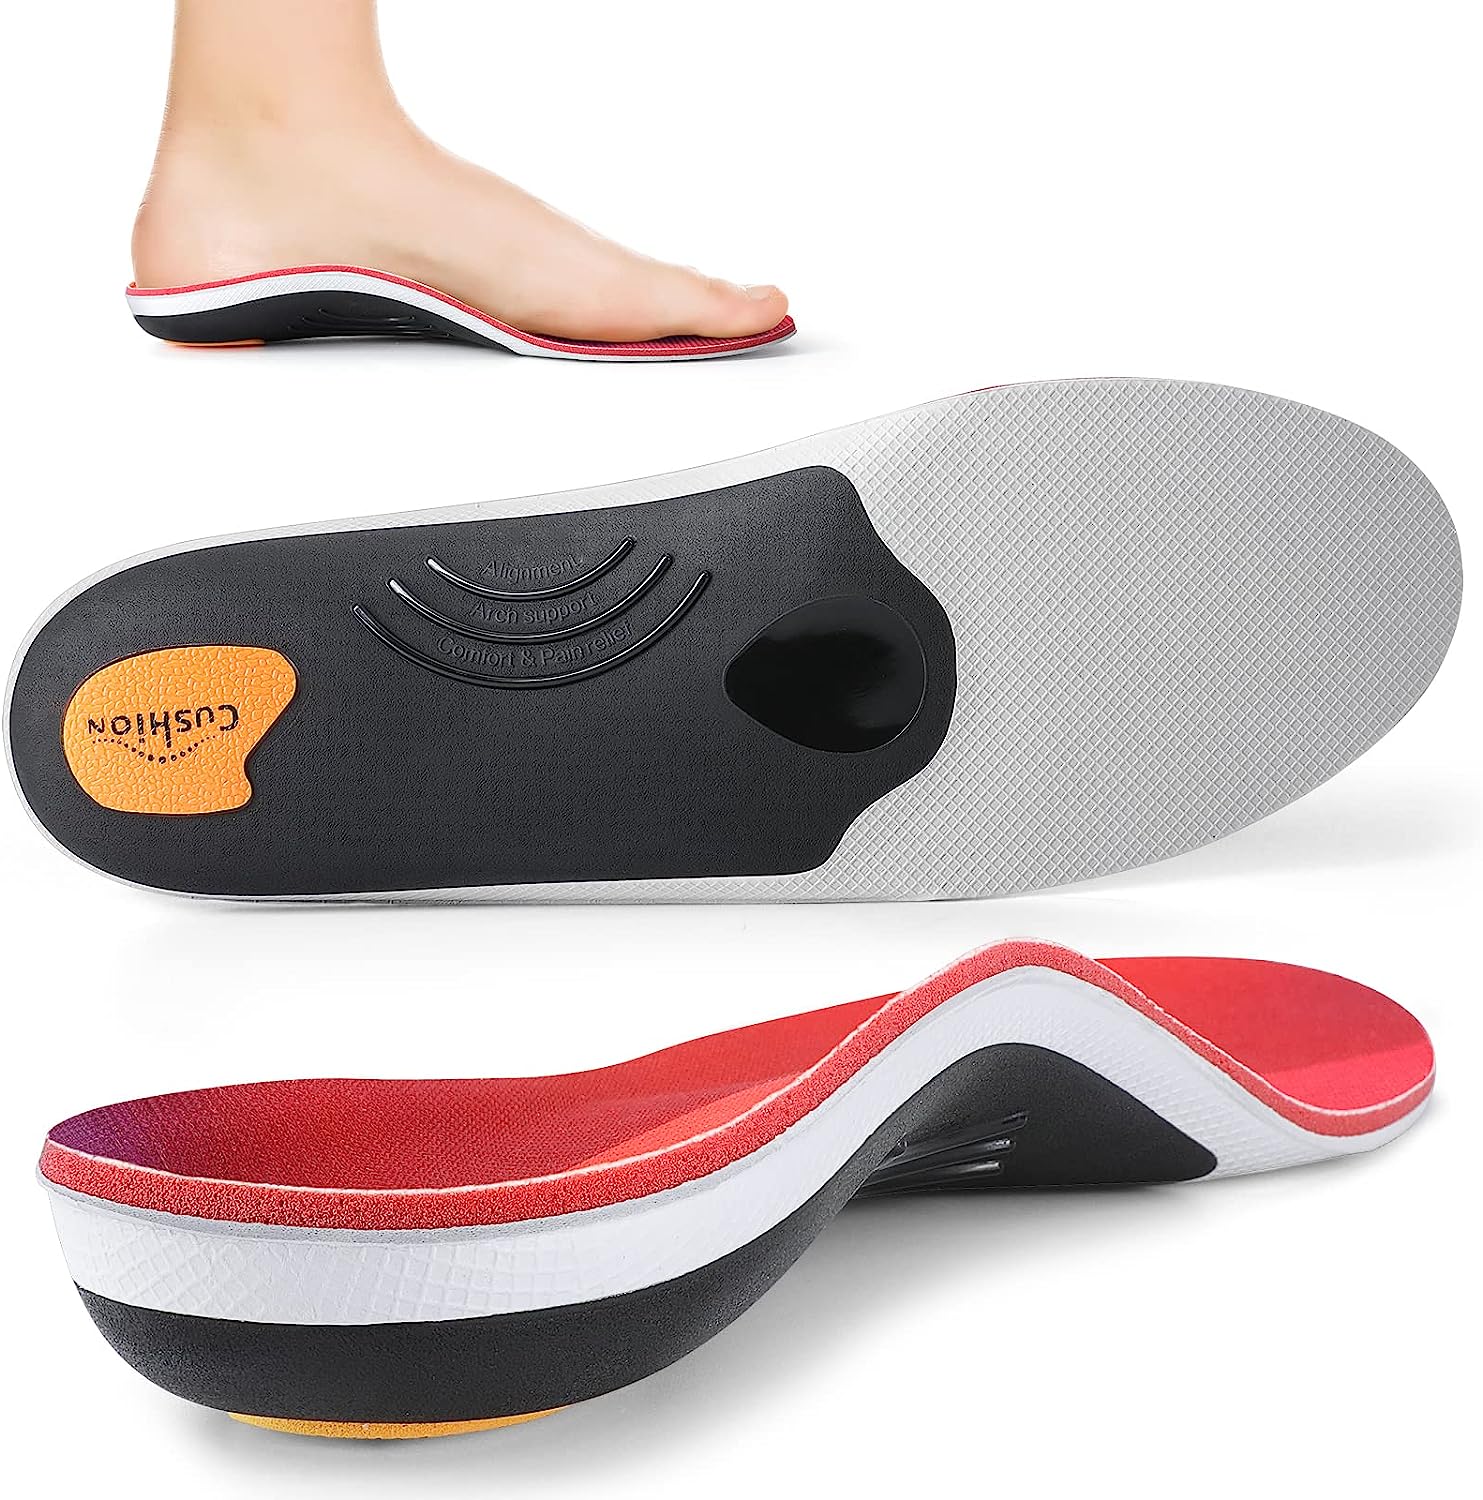 PCSsole Heavy Duty Arch Support Insoles,220+lbs [...]